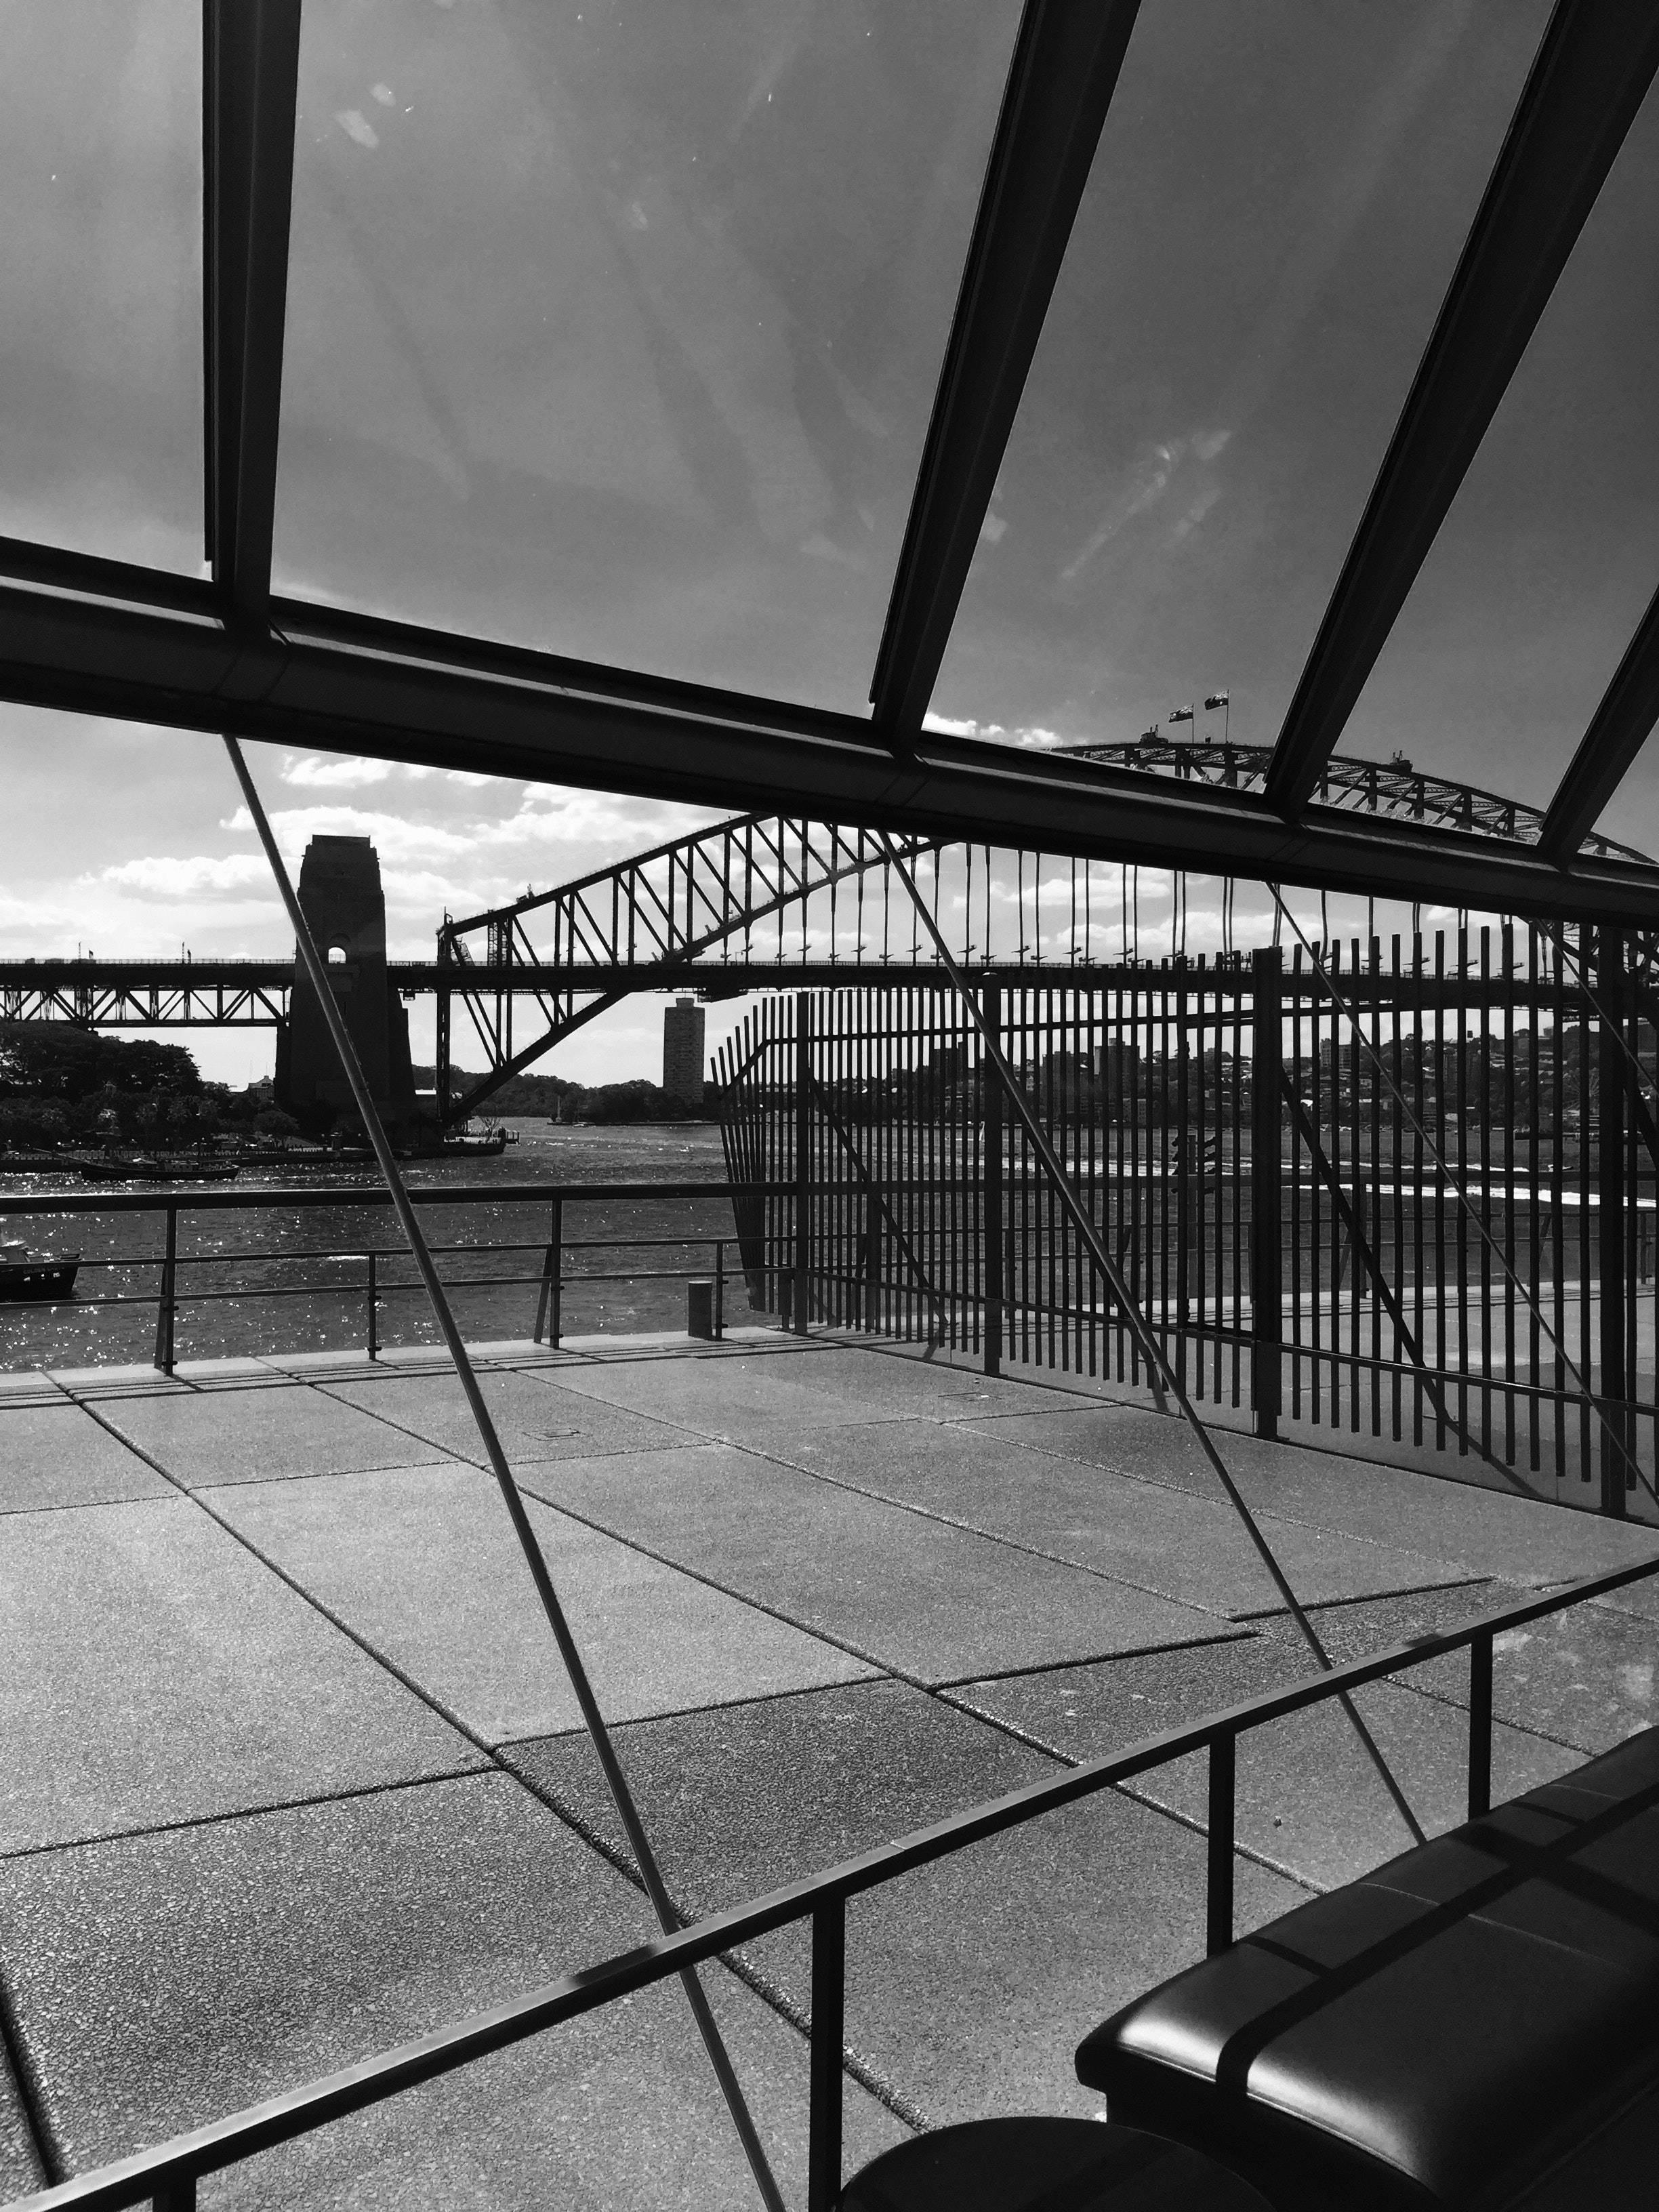 Grayscale Photo of Metal Fence, Architecture, Black-and-white, Bridge, Building, HQ Photo